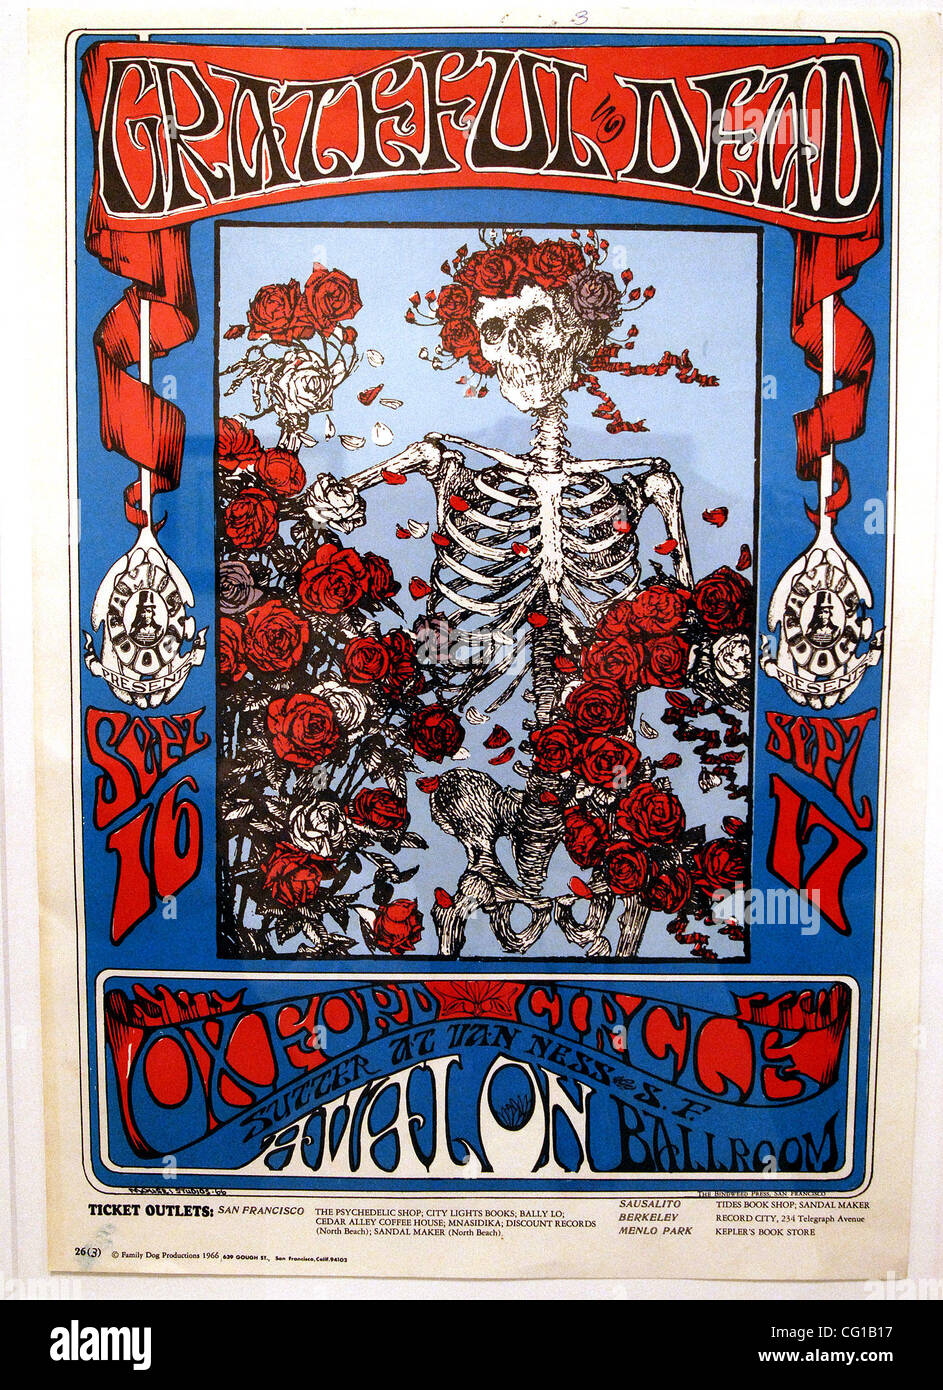 This 13x20 poster art titled 'Grateful Dead-Skeleton in Roses' made by Stanley Mouse in 1966, is on exhibit with other 1960s poster artwork at the Brentwood Education and Technology Center in Brentwood, Calif., on Wednesday, August 1, 2007. Poster Art collector Paul Allman is exhibiting the poster a Stock Photo